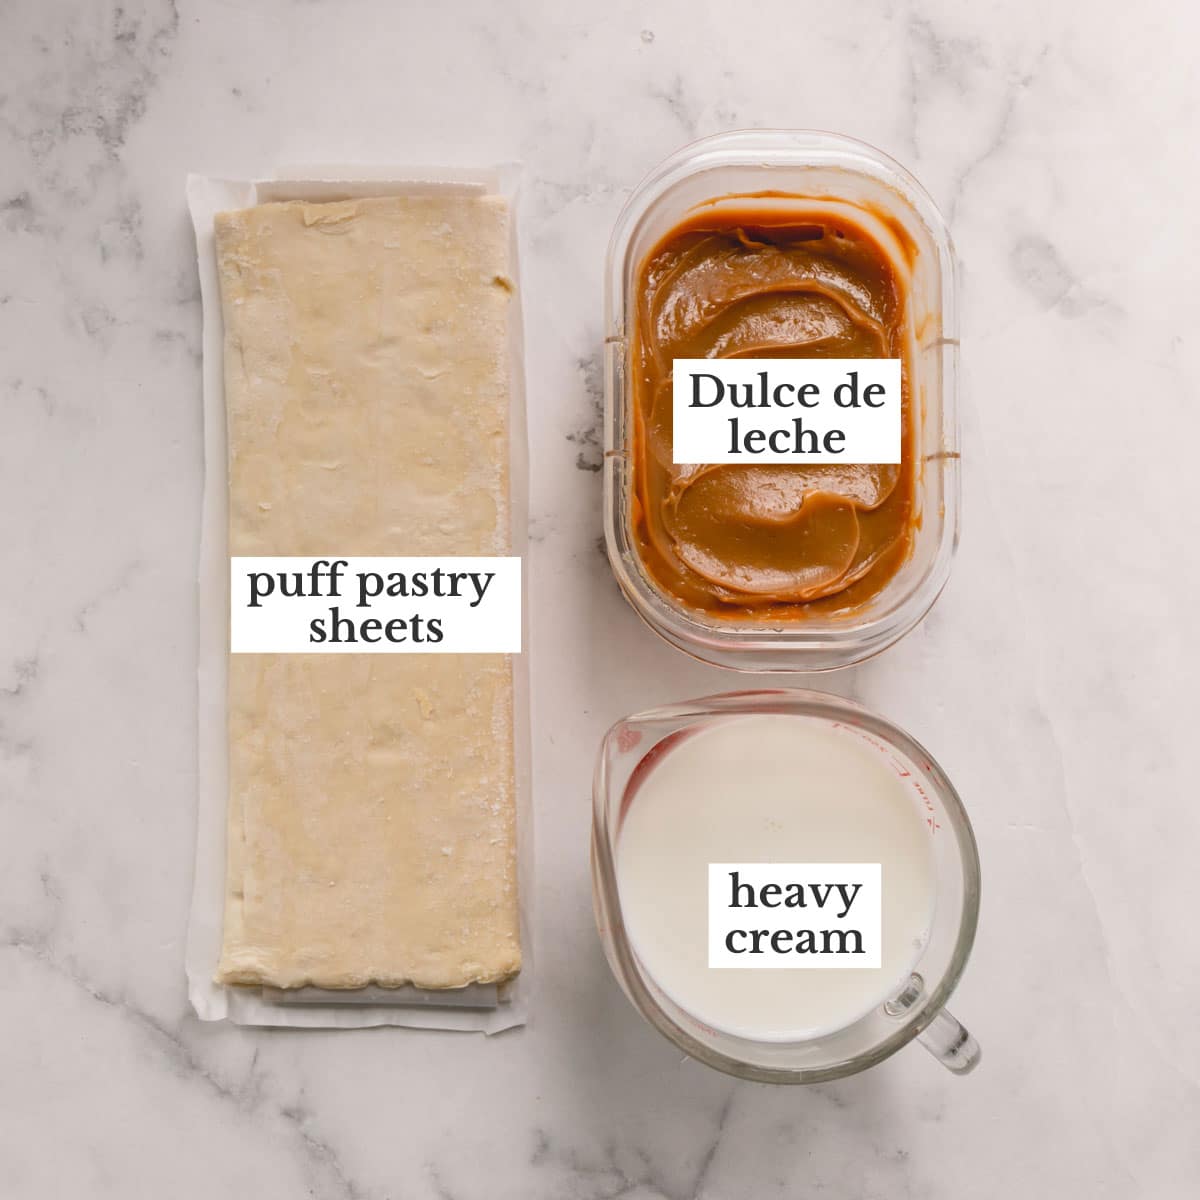 Ingredients for puff pastry Napoleon cake: puff pastry sheet, dulce de leche, heavy cream.